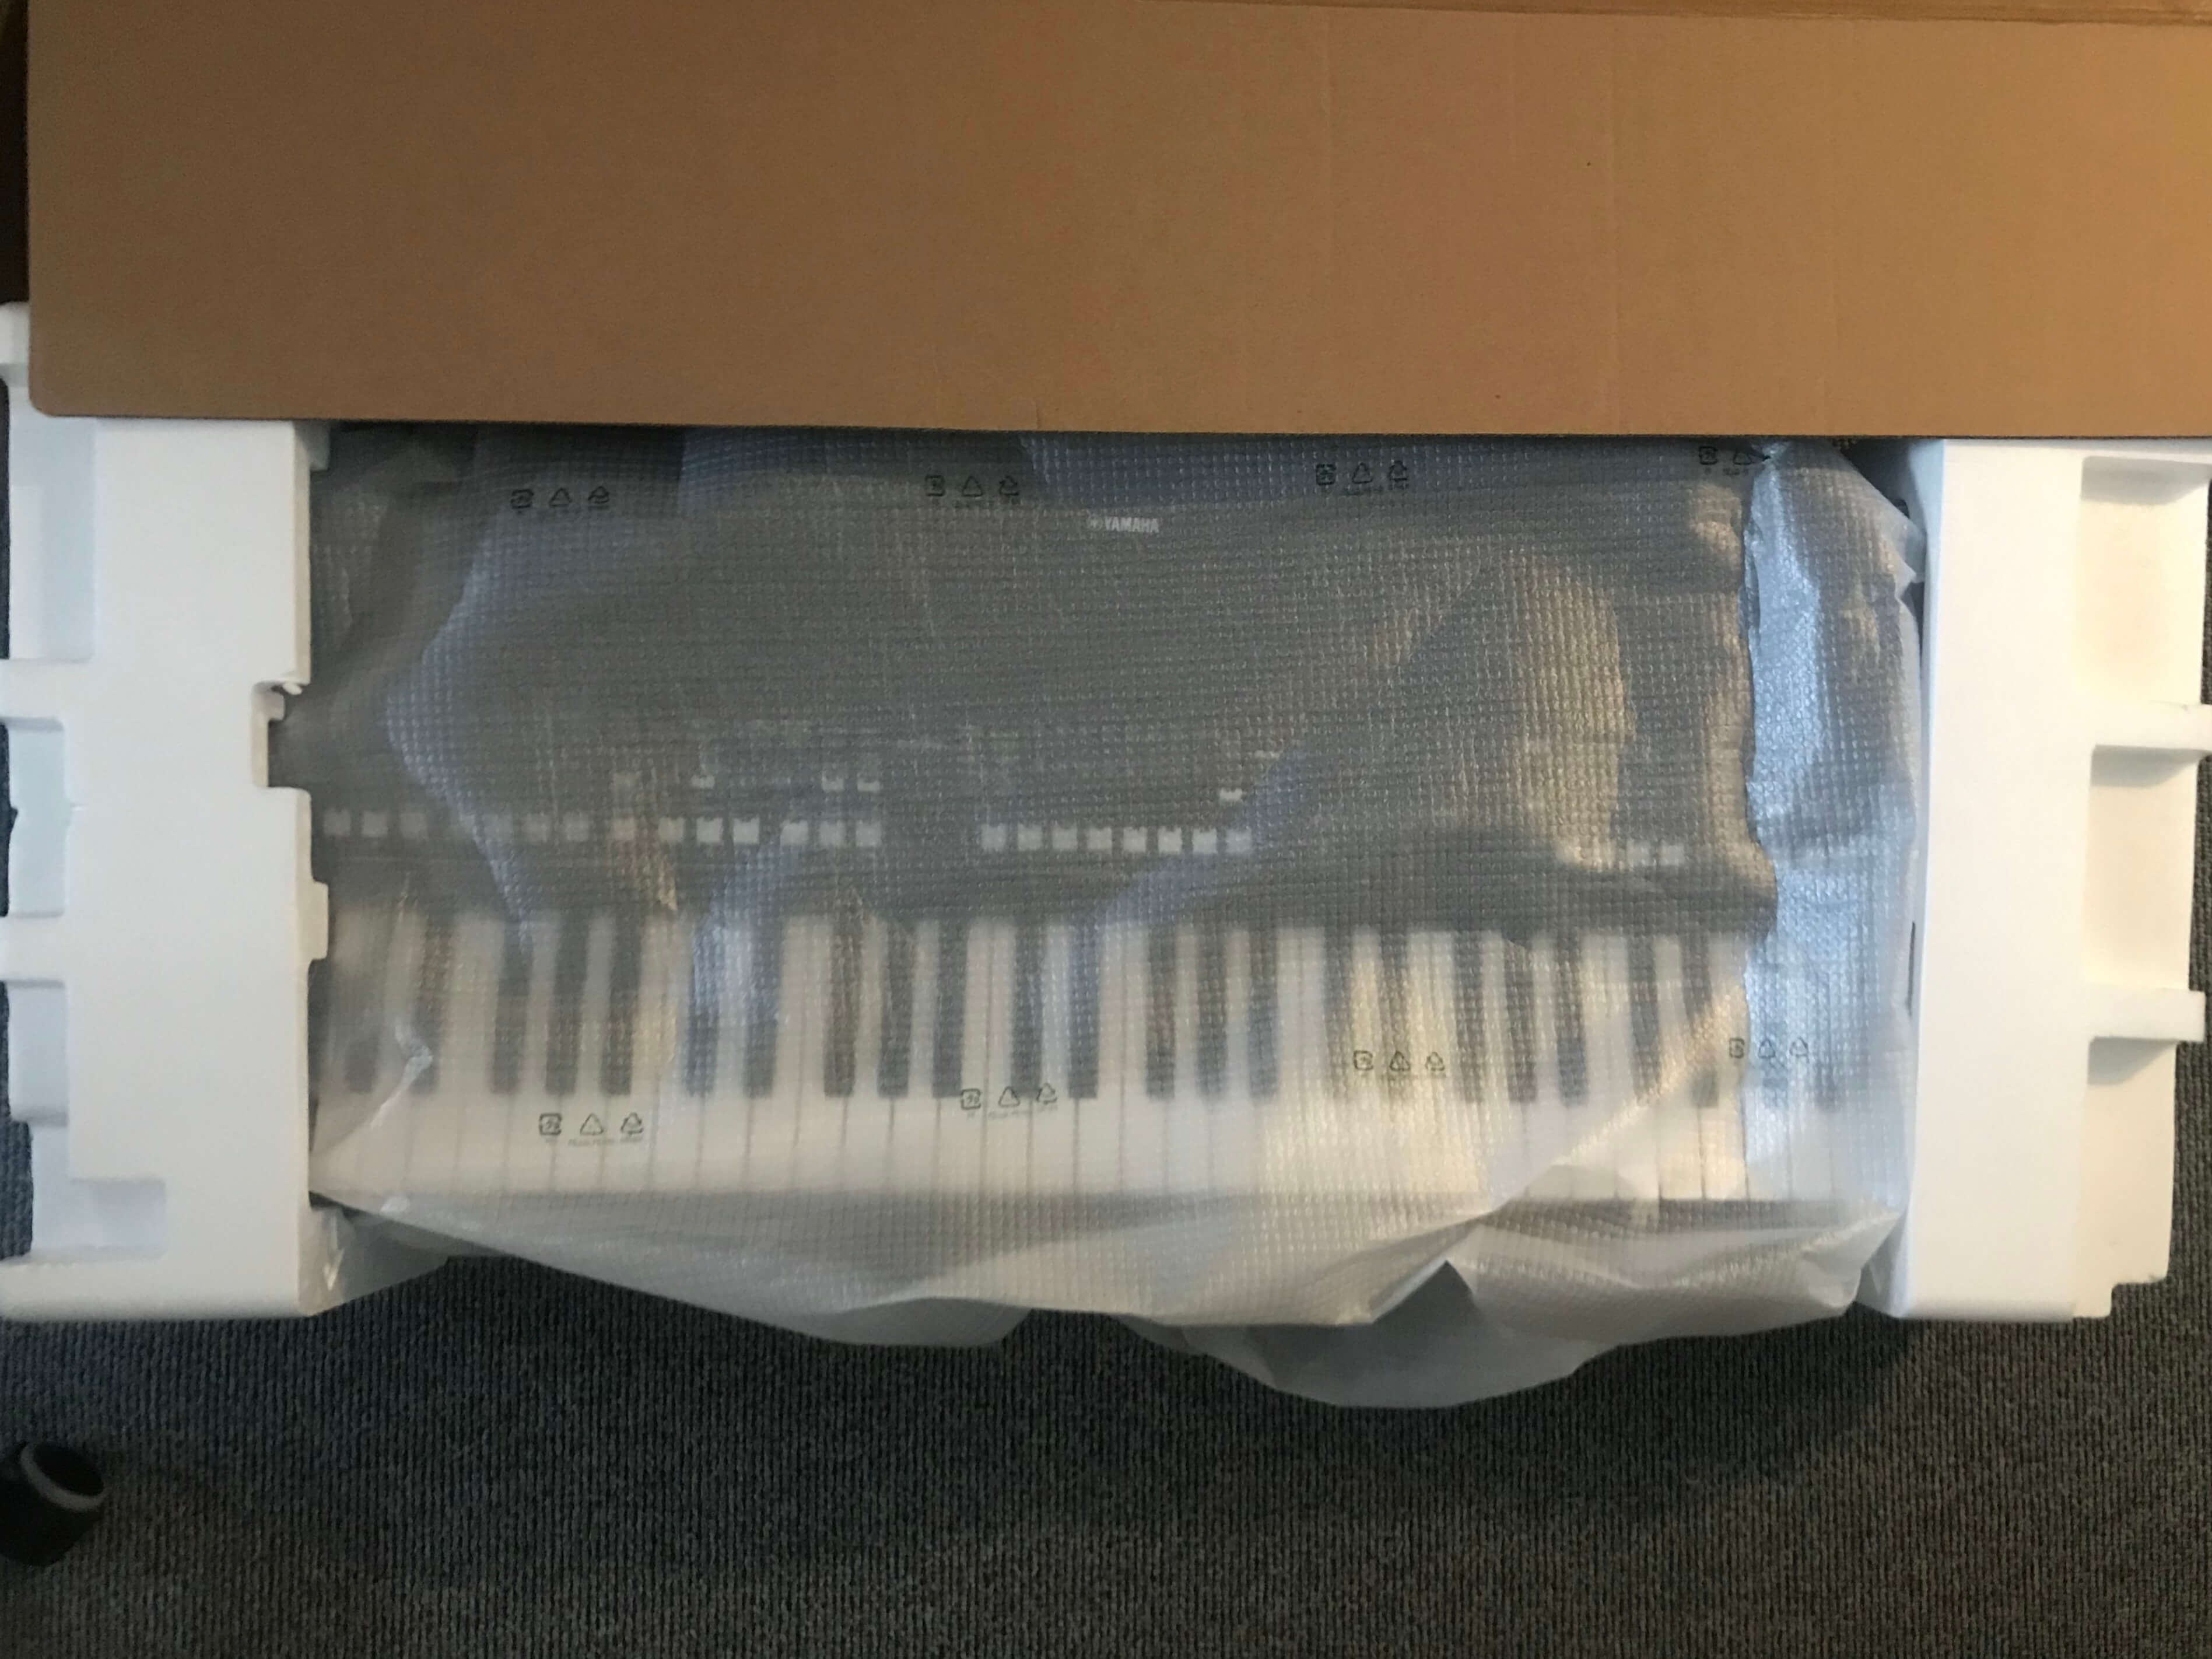 Unboxing Synth.jpeg